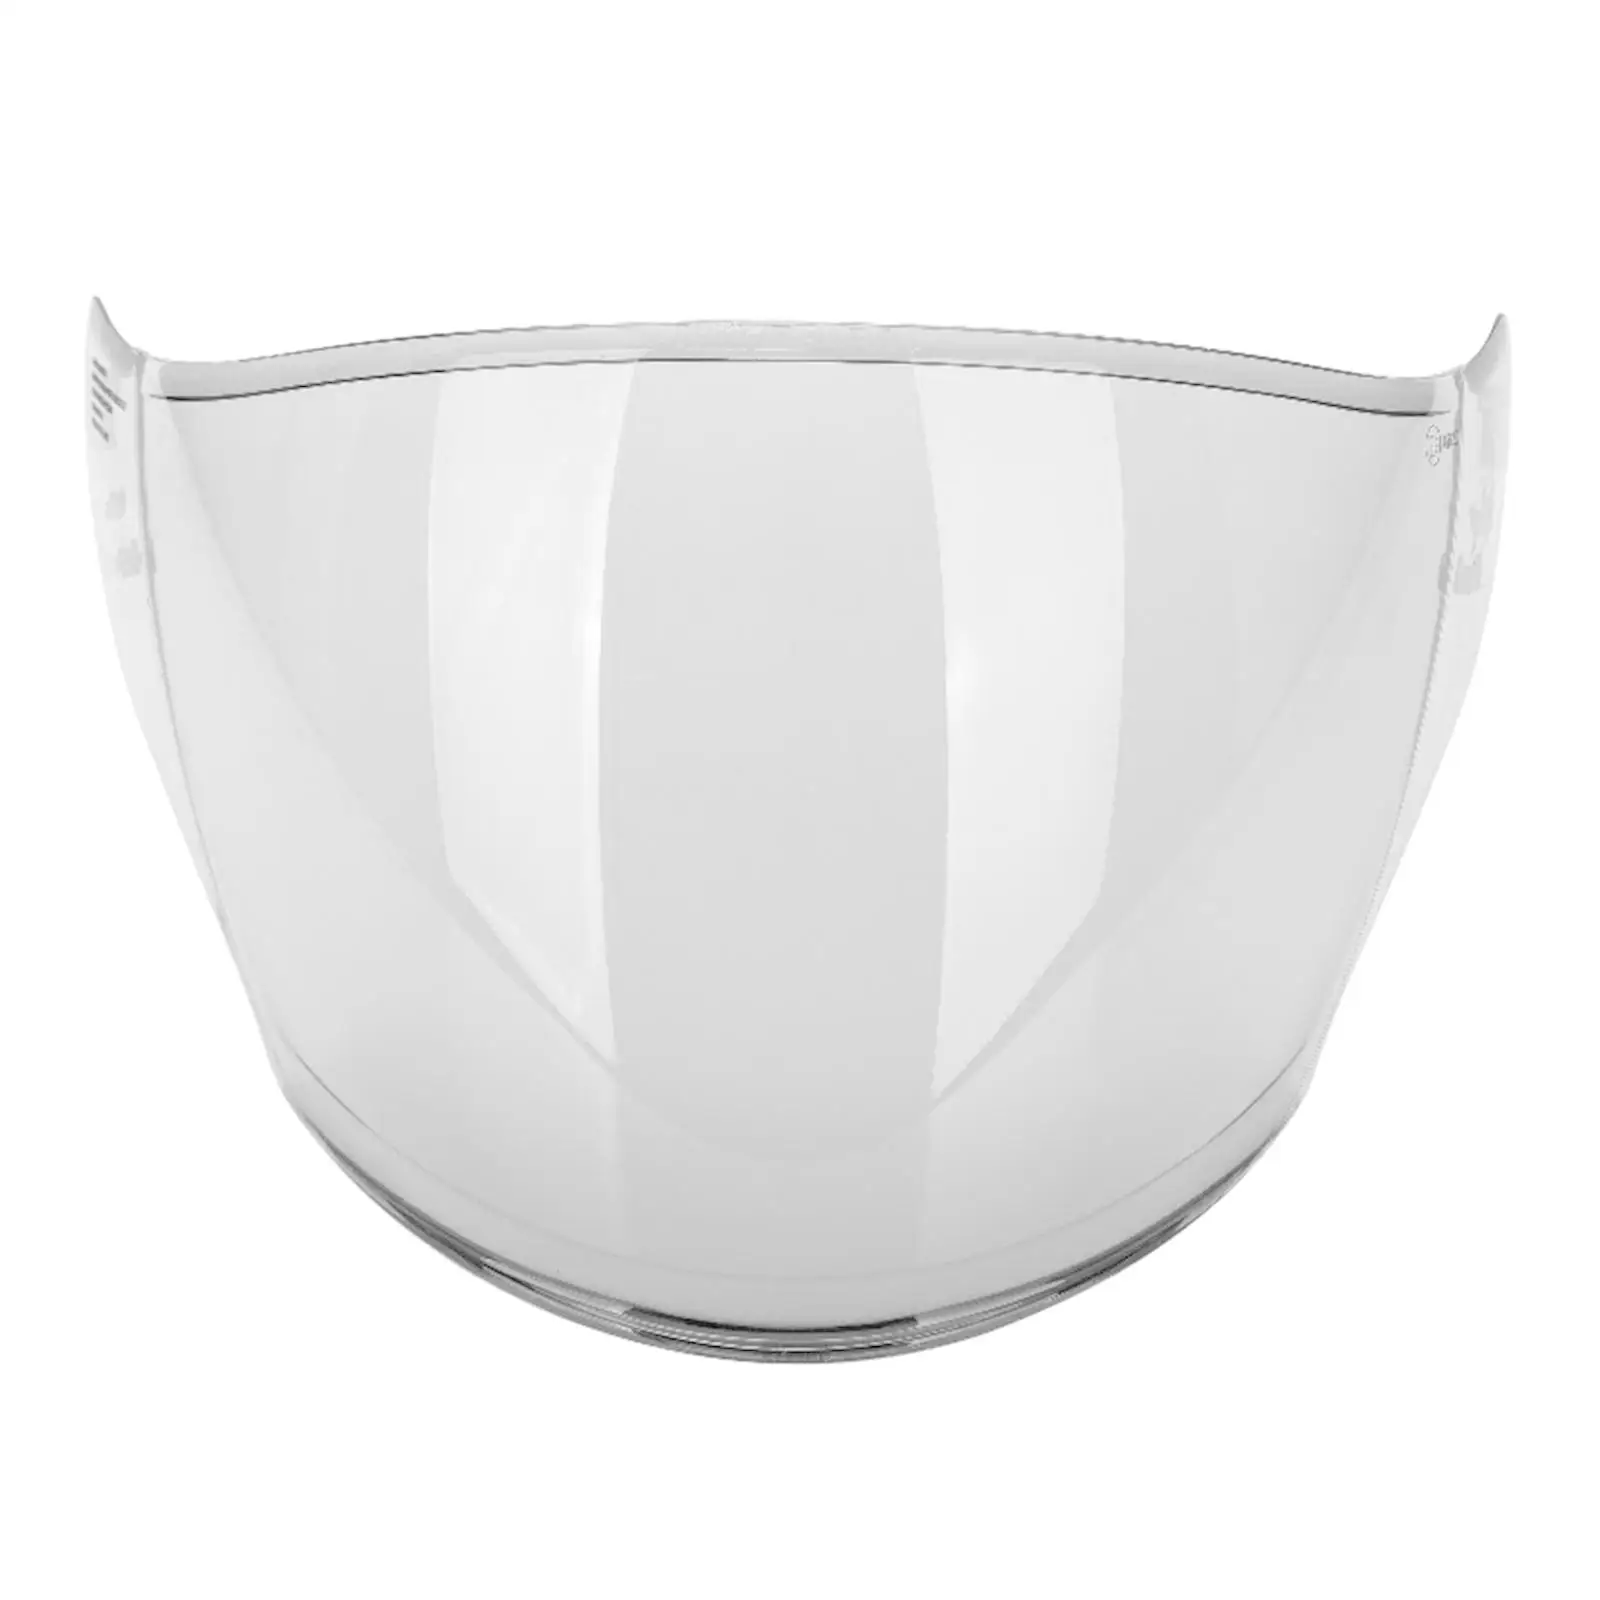 PC Compact Lightweight  Visor Replacement  504 MT-